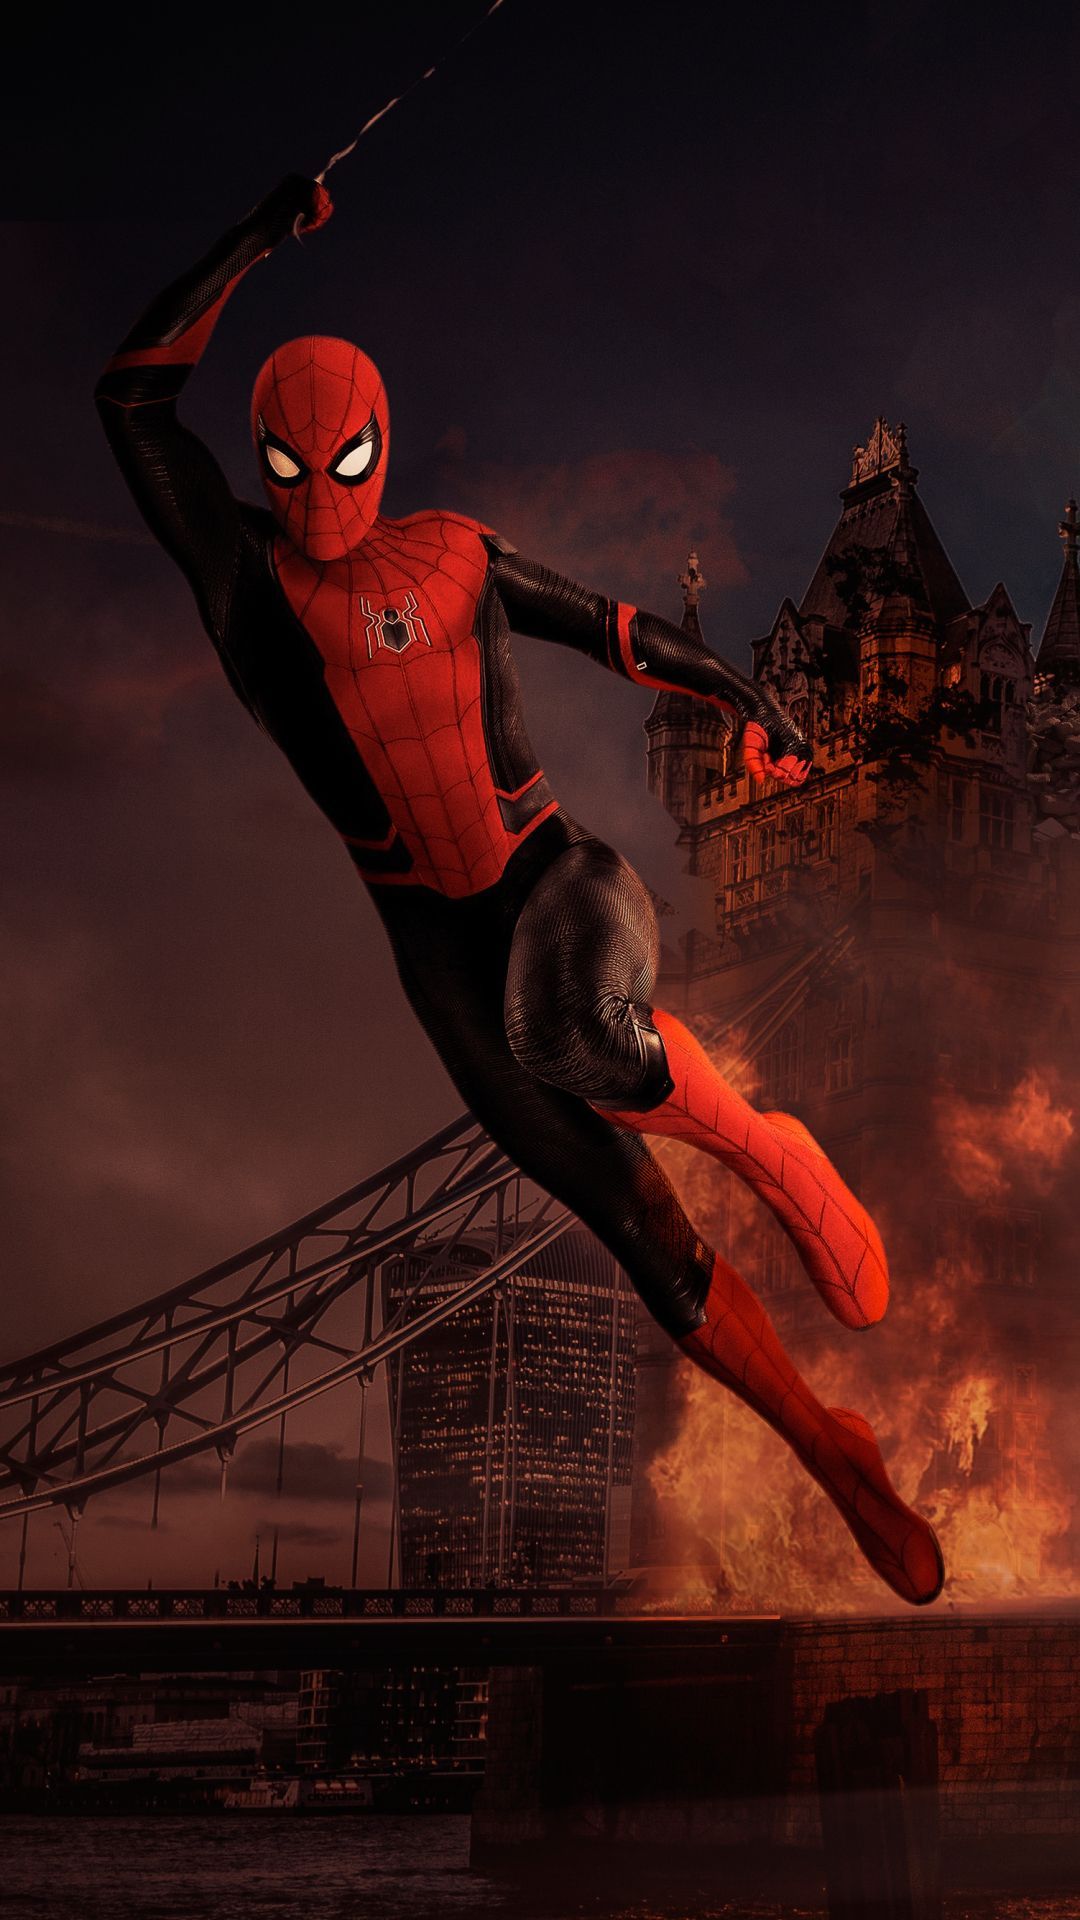 Spider Man Mobile Wallpaper Form The Movie Far From Home. Marvel